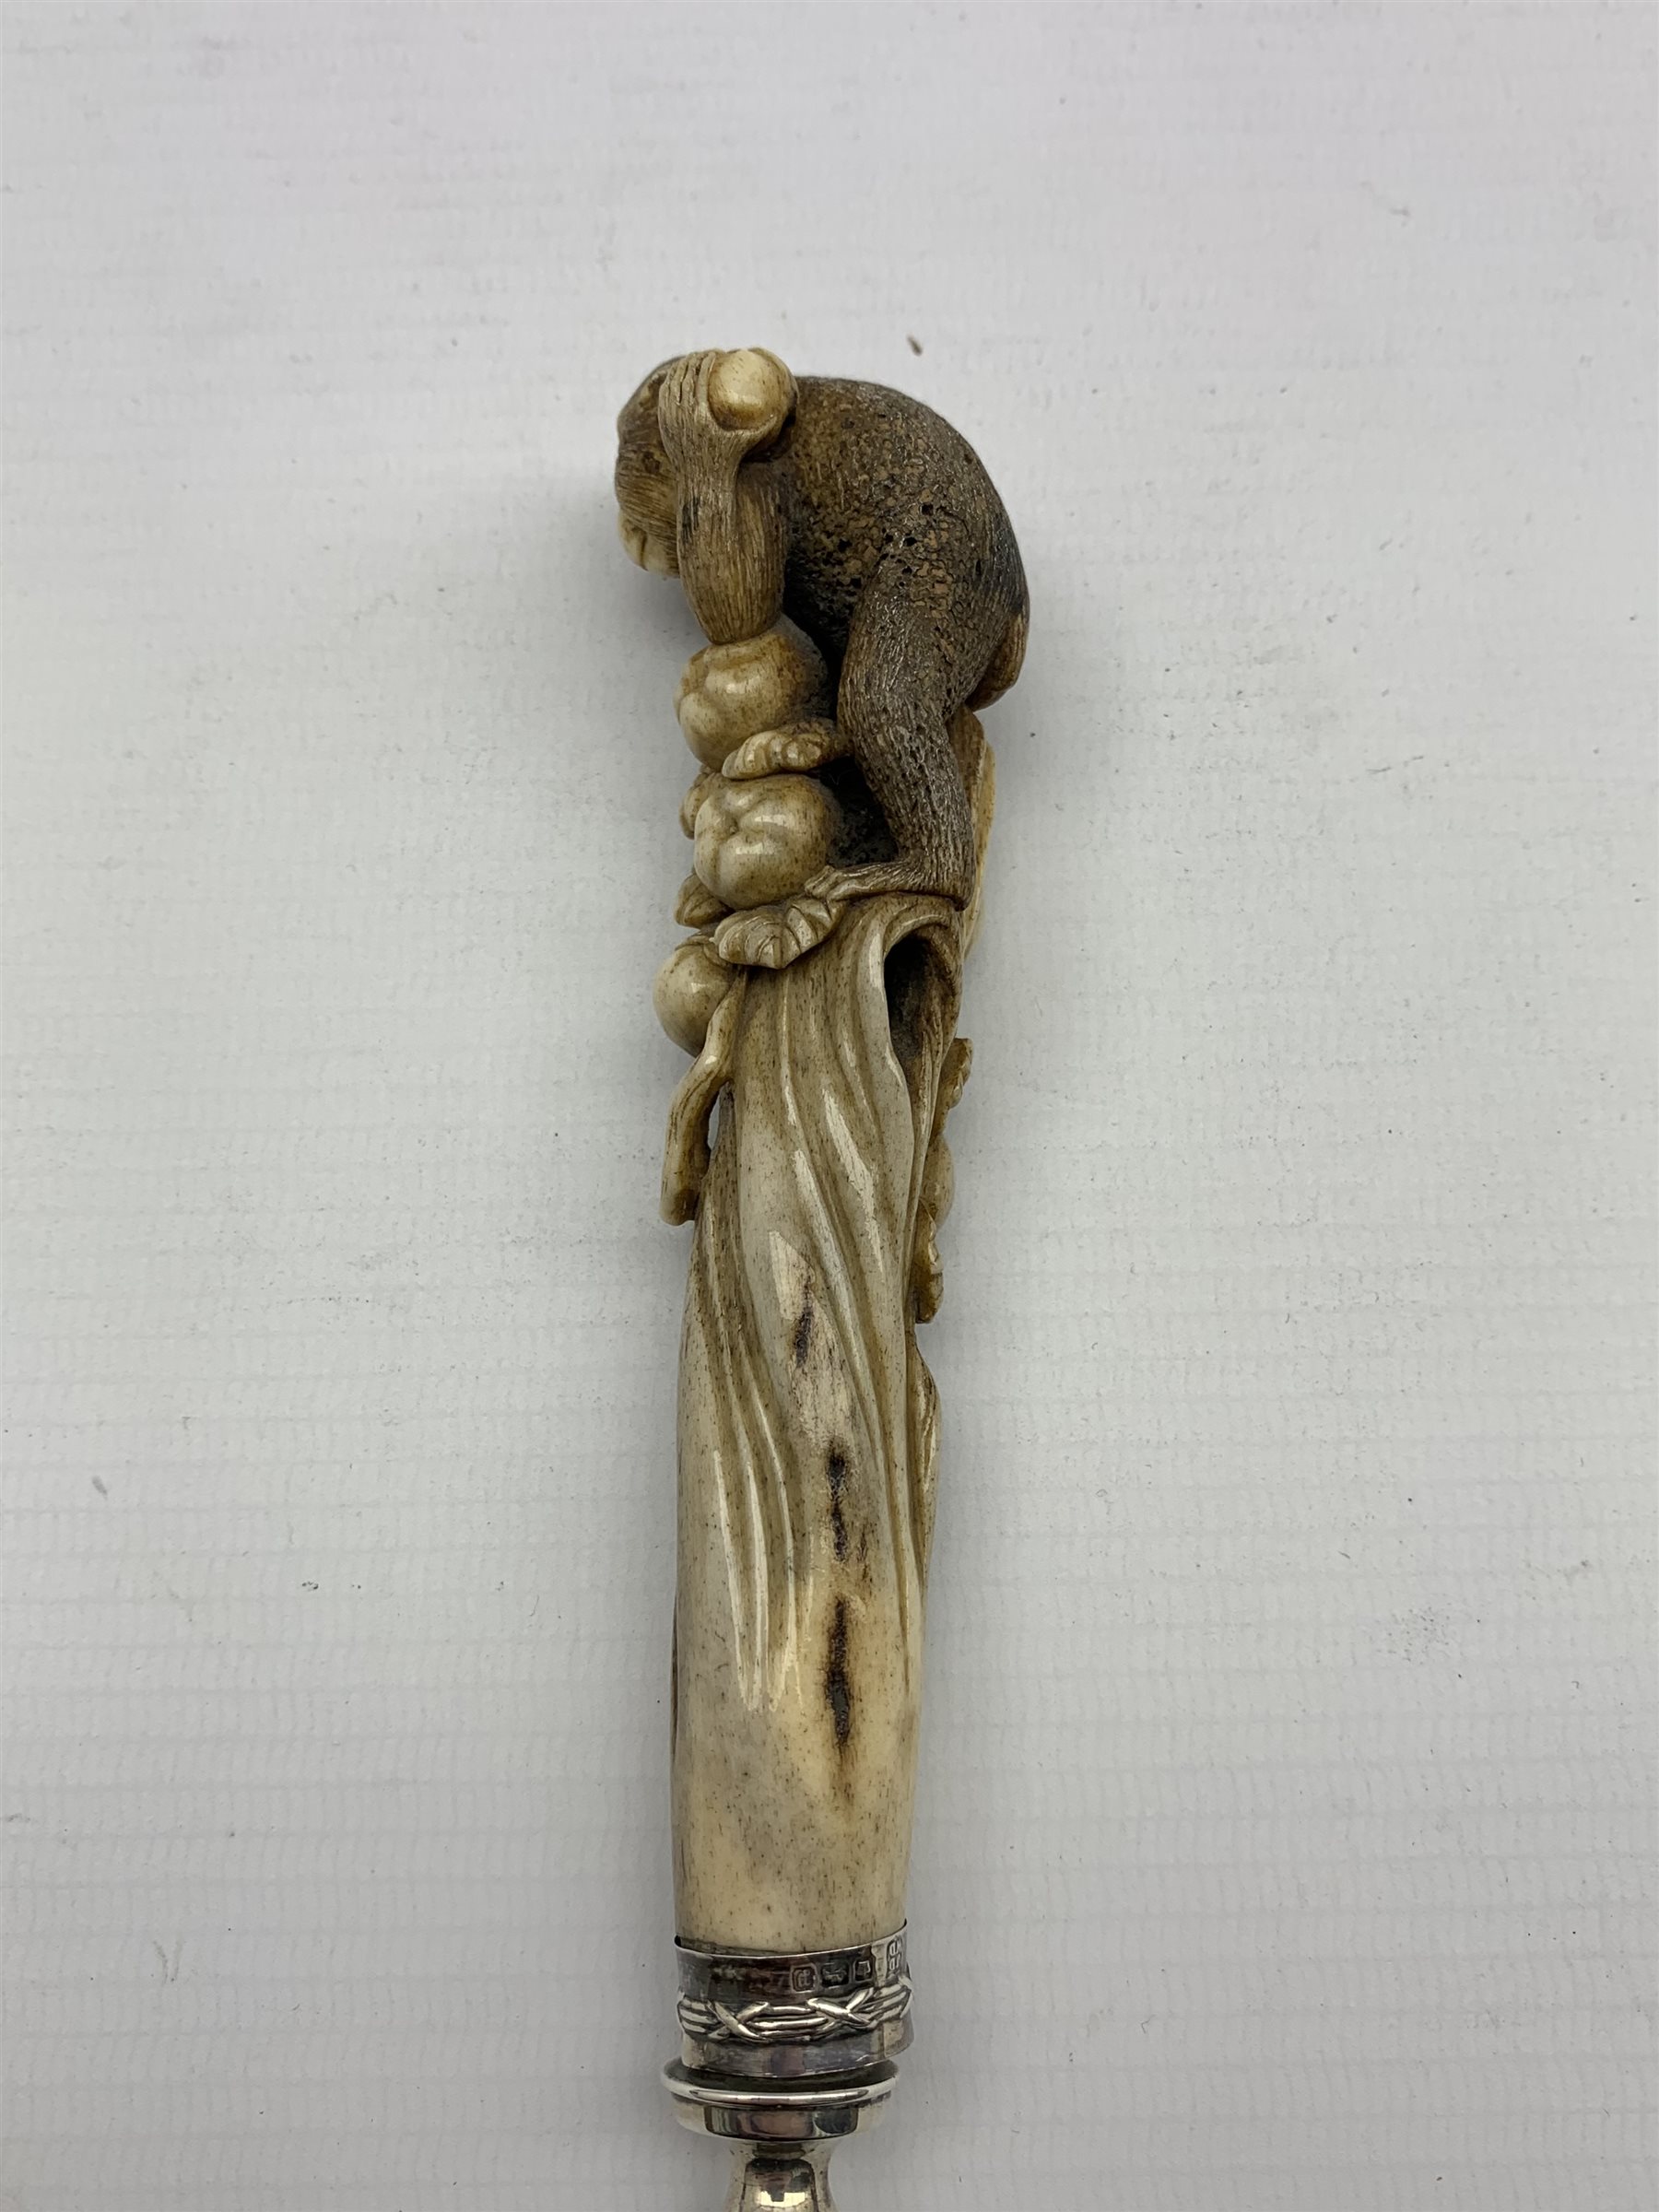 Edwardian silver and bone letter opener, the handle finely carved as a Monkey gathering fruit by Jam - Image 4 of 6